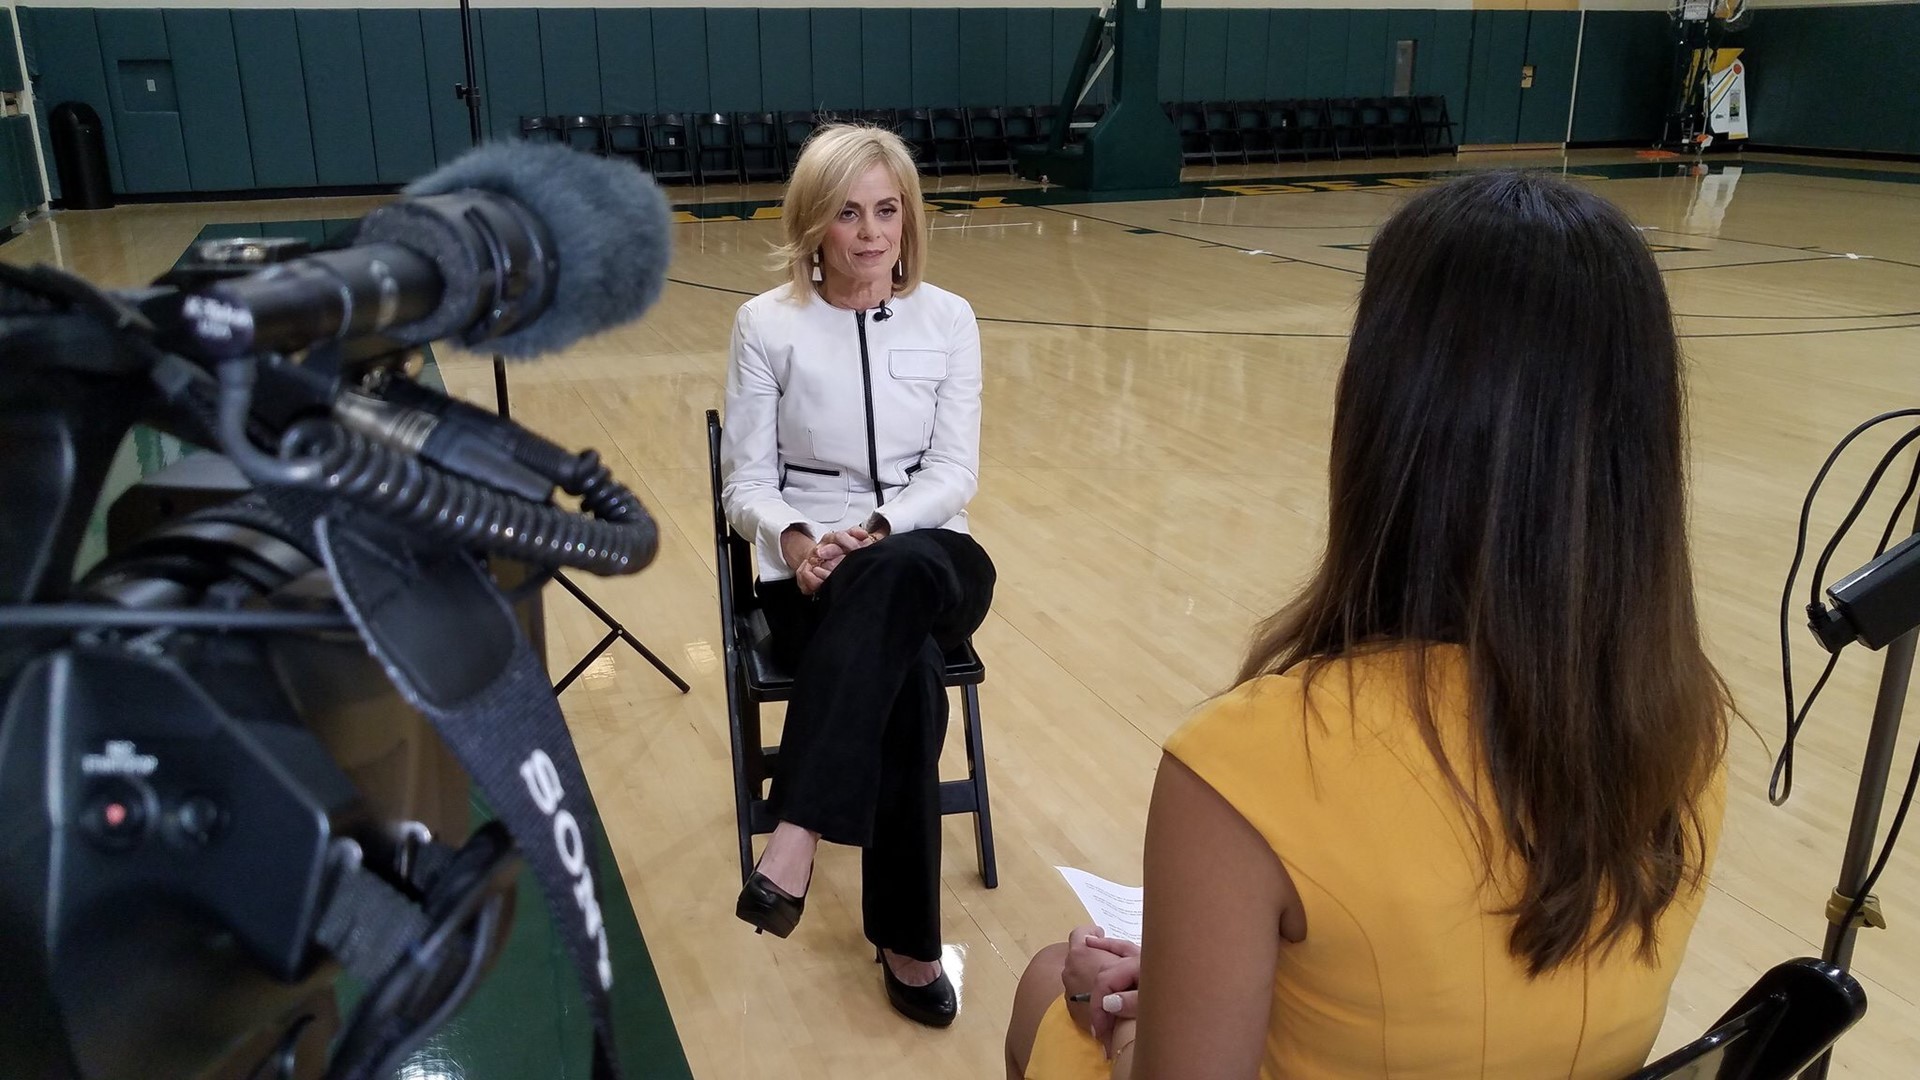 Kim Mulkey has coached a generation of women as the Baylor Lady Bears head coach, while serving as a role model for working mothers.